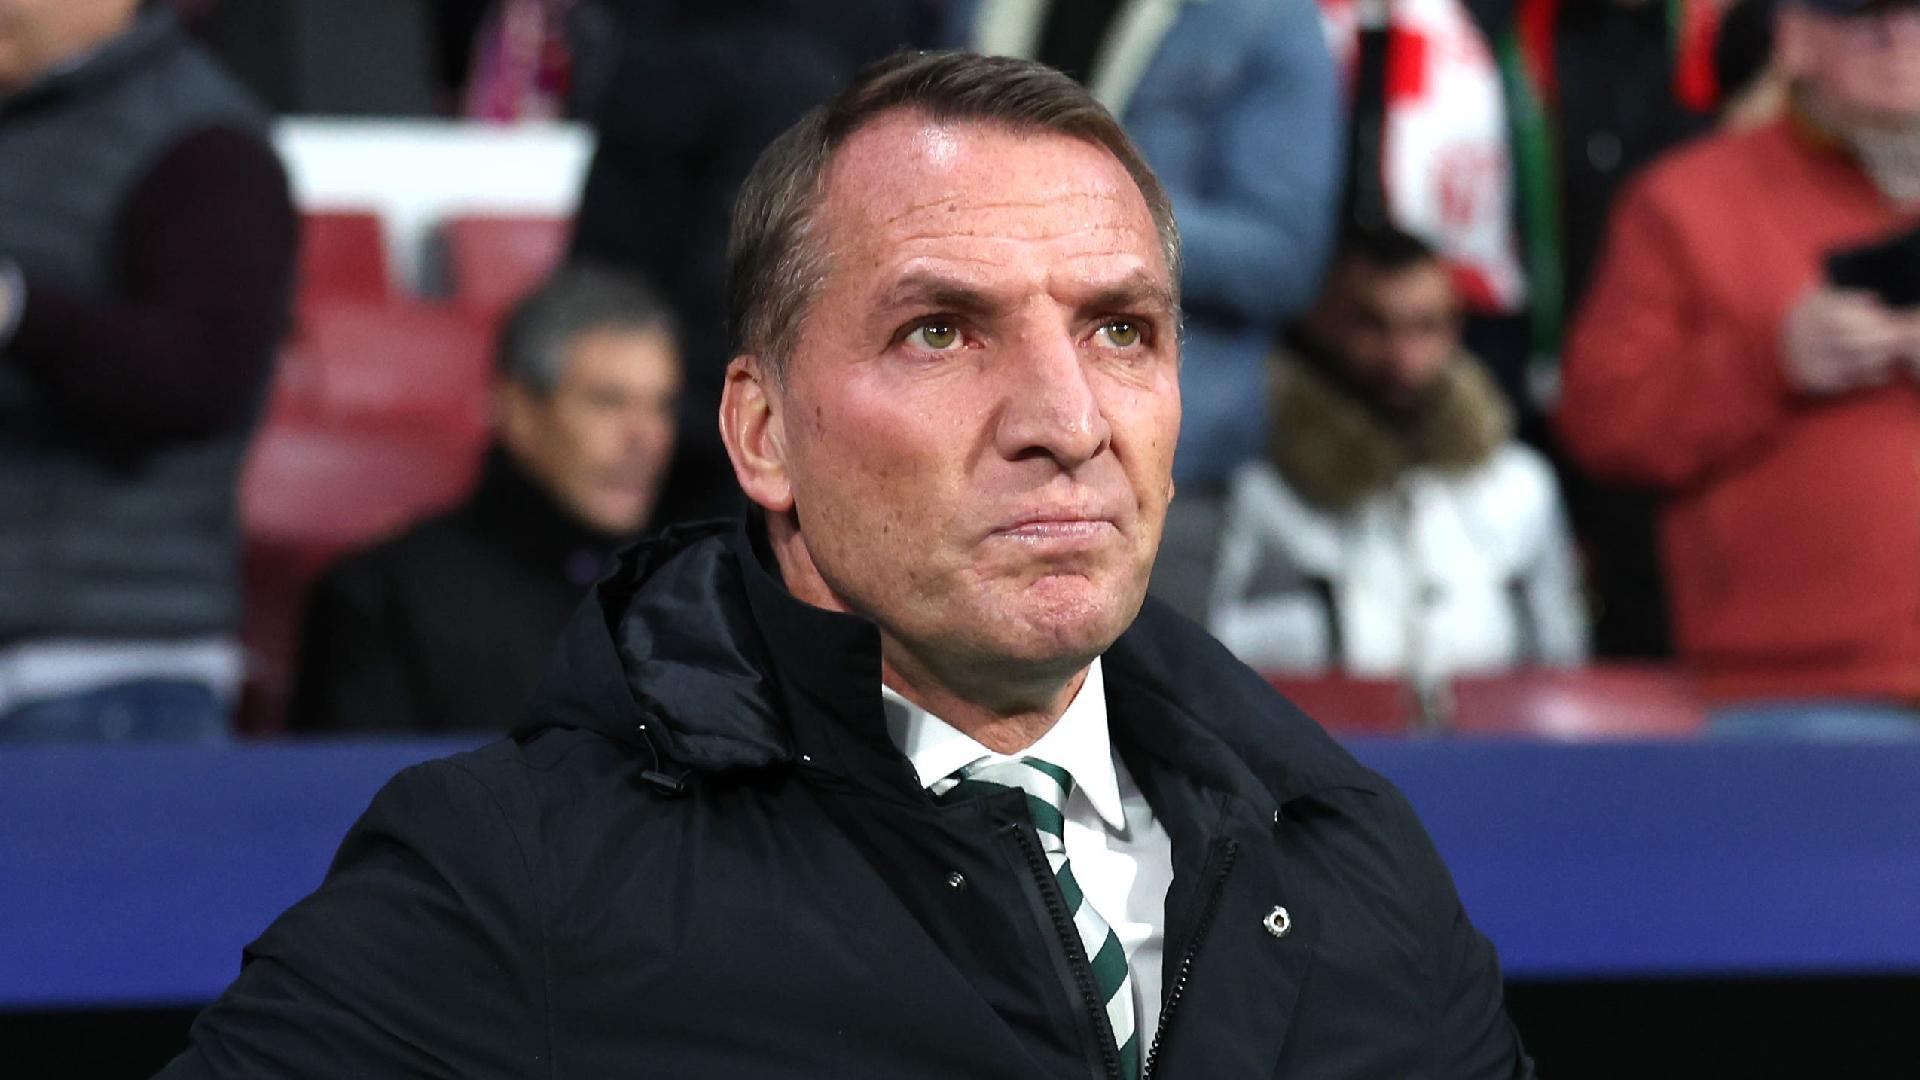 Brendan Rodgers bemoans Celtic’s lack of quality as they exit European stage